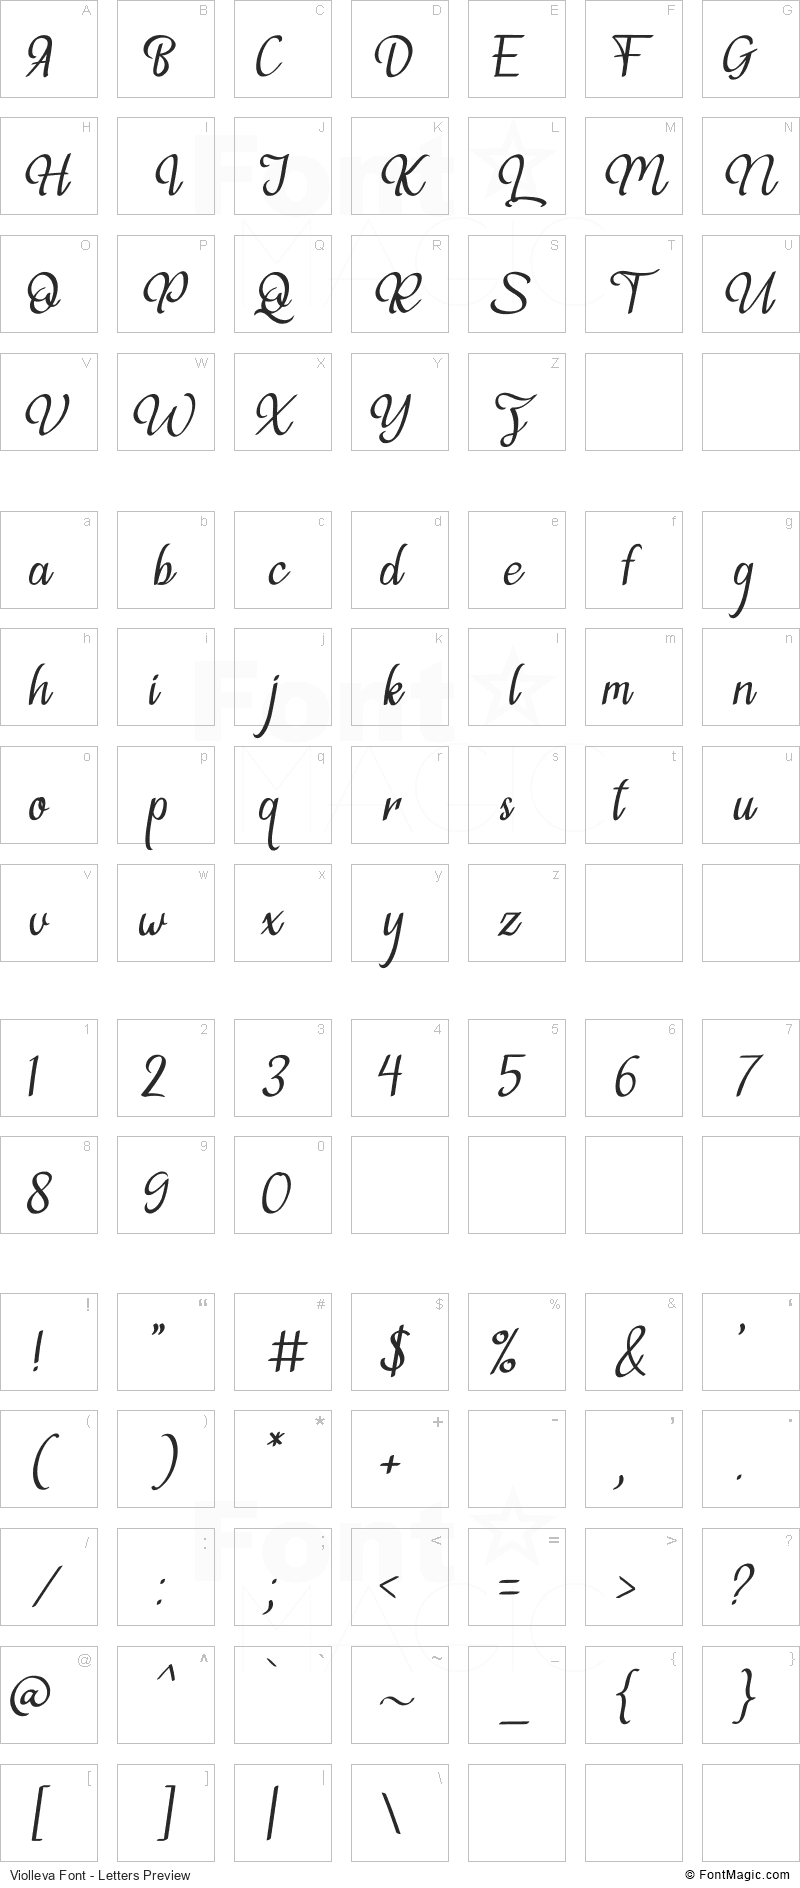 Violleva Font - All Latters Preview Chart